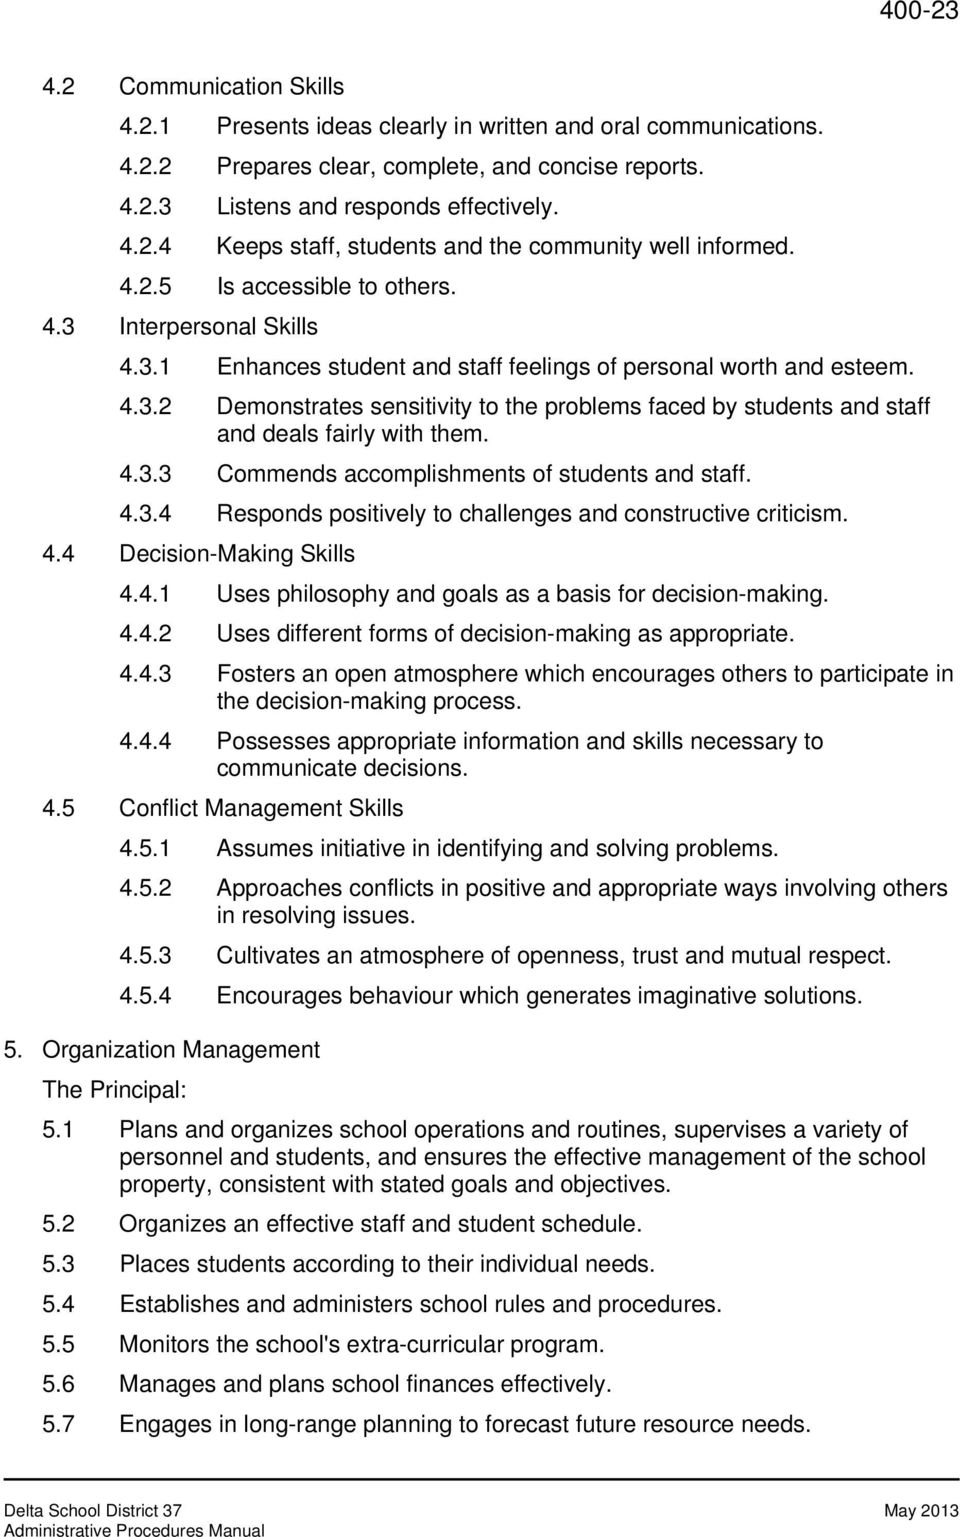 4.3.3 Commends accomplishments of students and staff. 4.3.4 Responds positively to challenges and constructive criticism. 4.4 Decision-Making Skills 4.4.1 Uses philosophy and goals as a basis for decision-making.